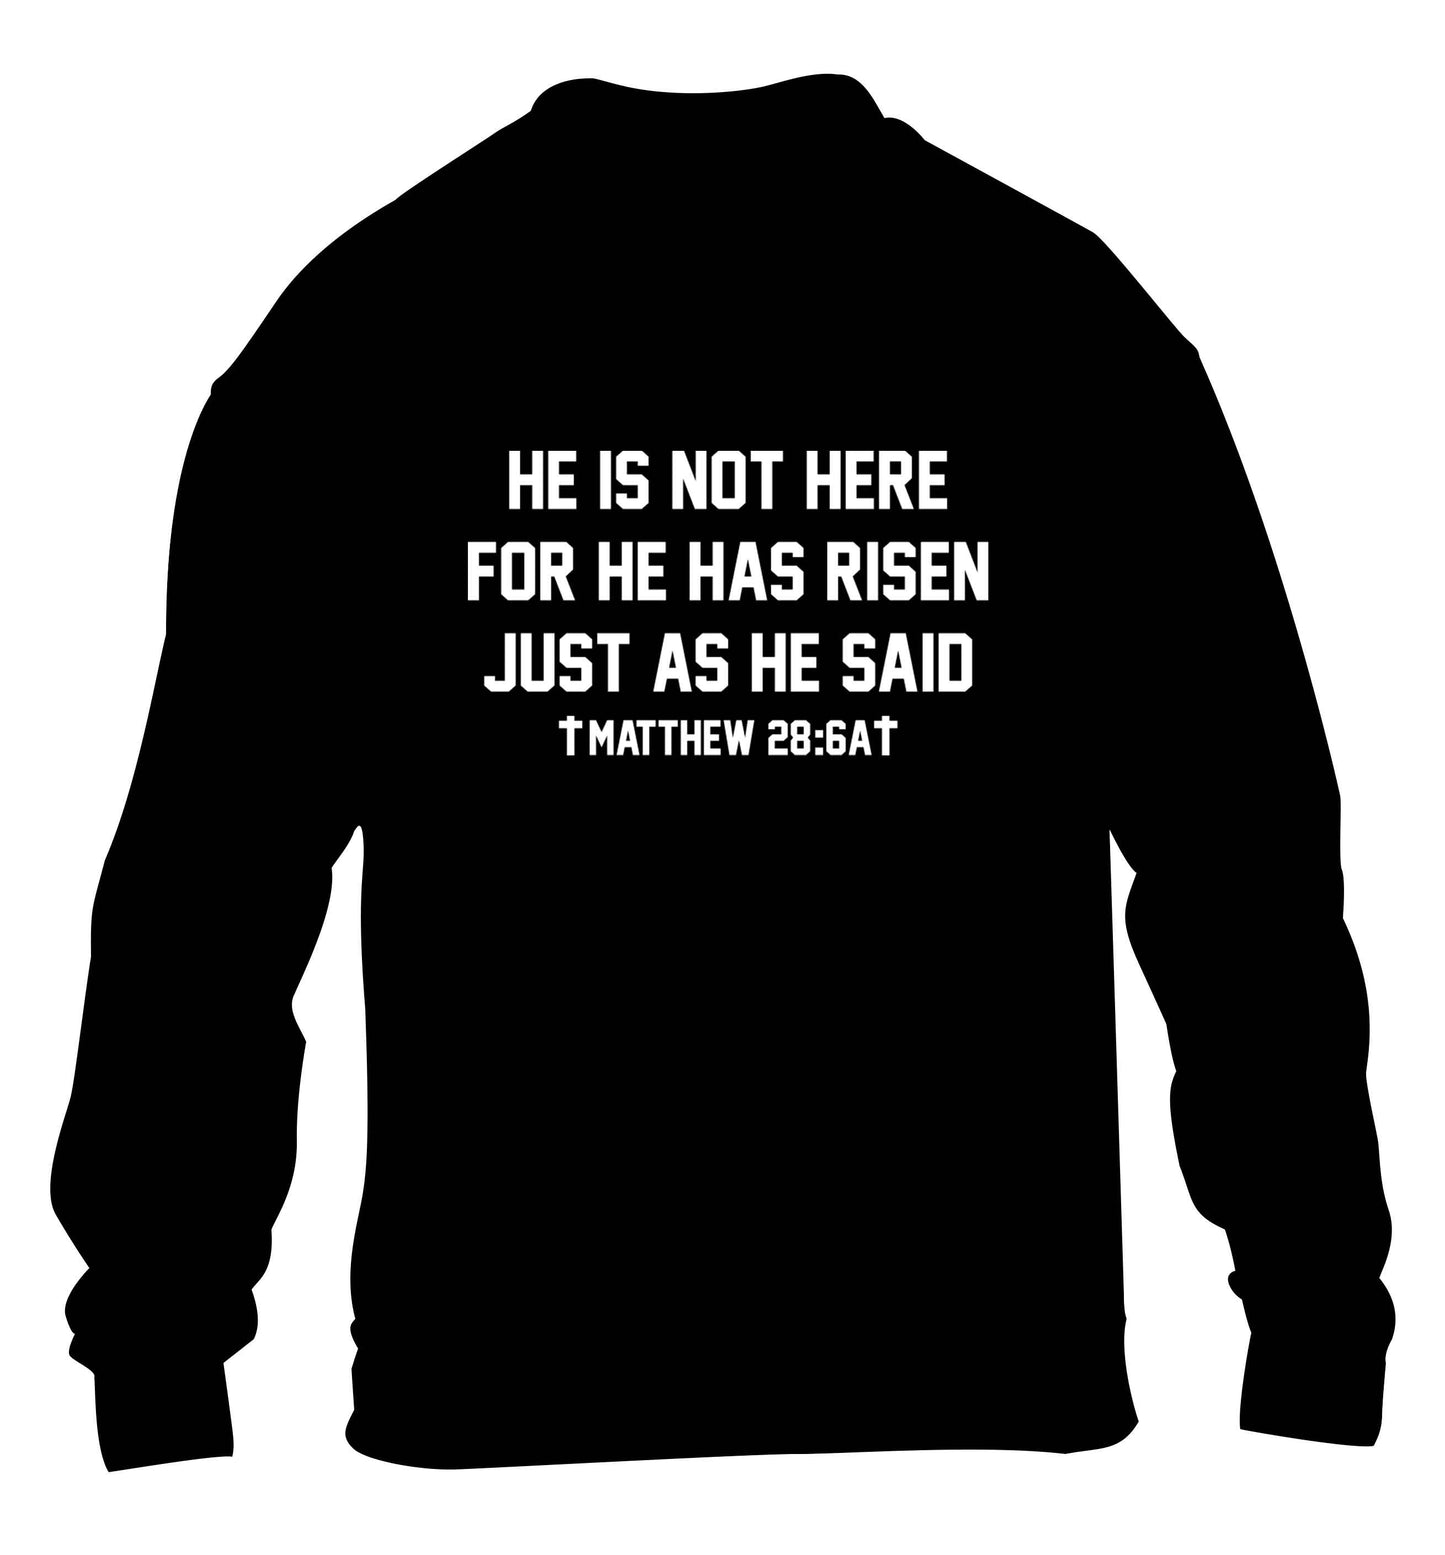 He is not here for he has risen just as he said matthew 28:6A children's black sweater 12-13 Years